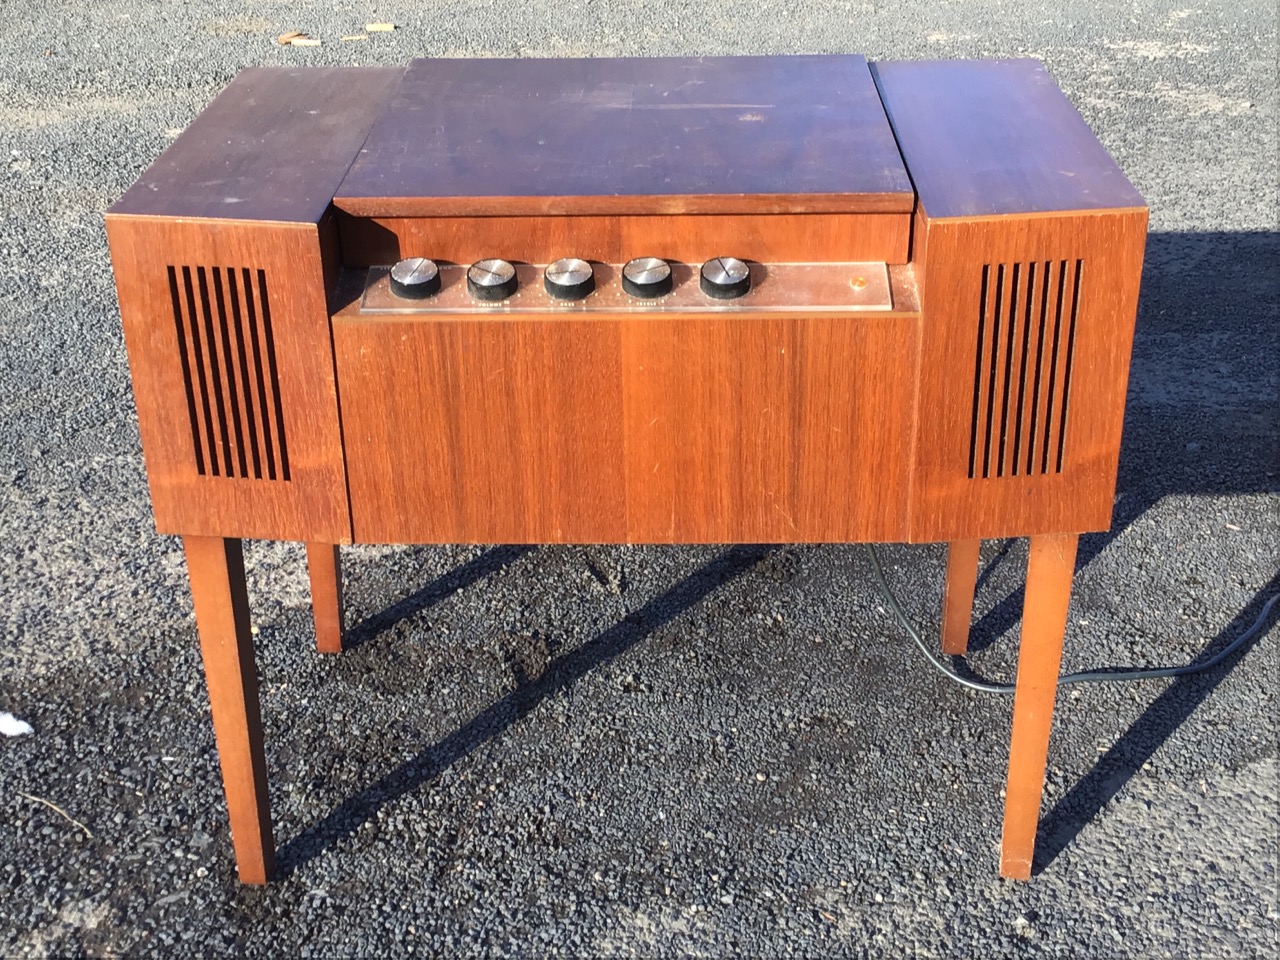 A 60s mahogany HMV stereo record player with perspex control panel and brushed aluminium knobs - Image 3 of 3